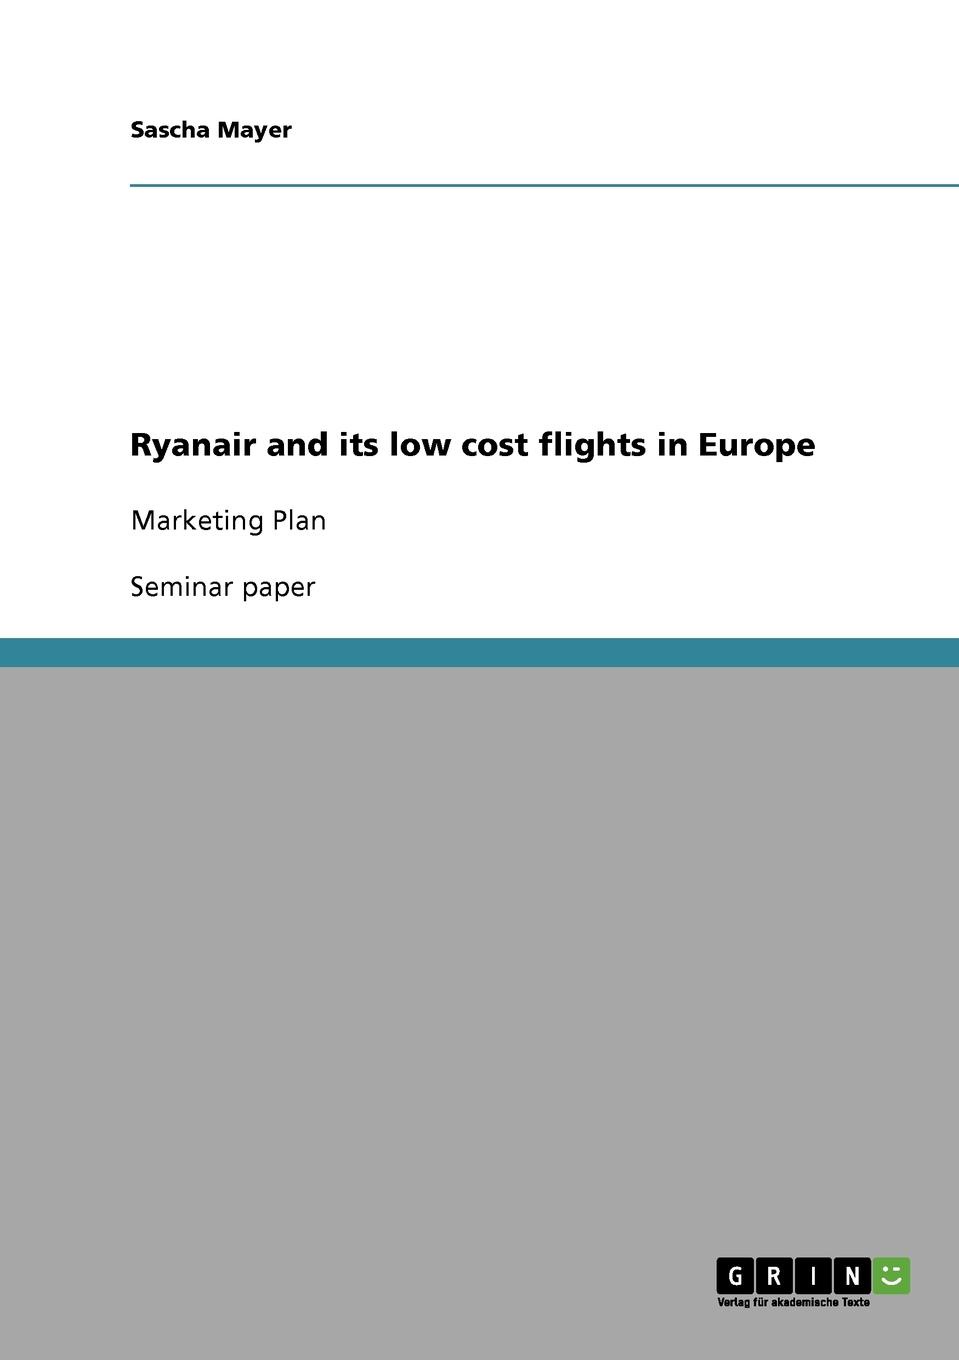 Ryanair and its low cost flights in Europe